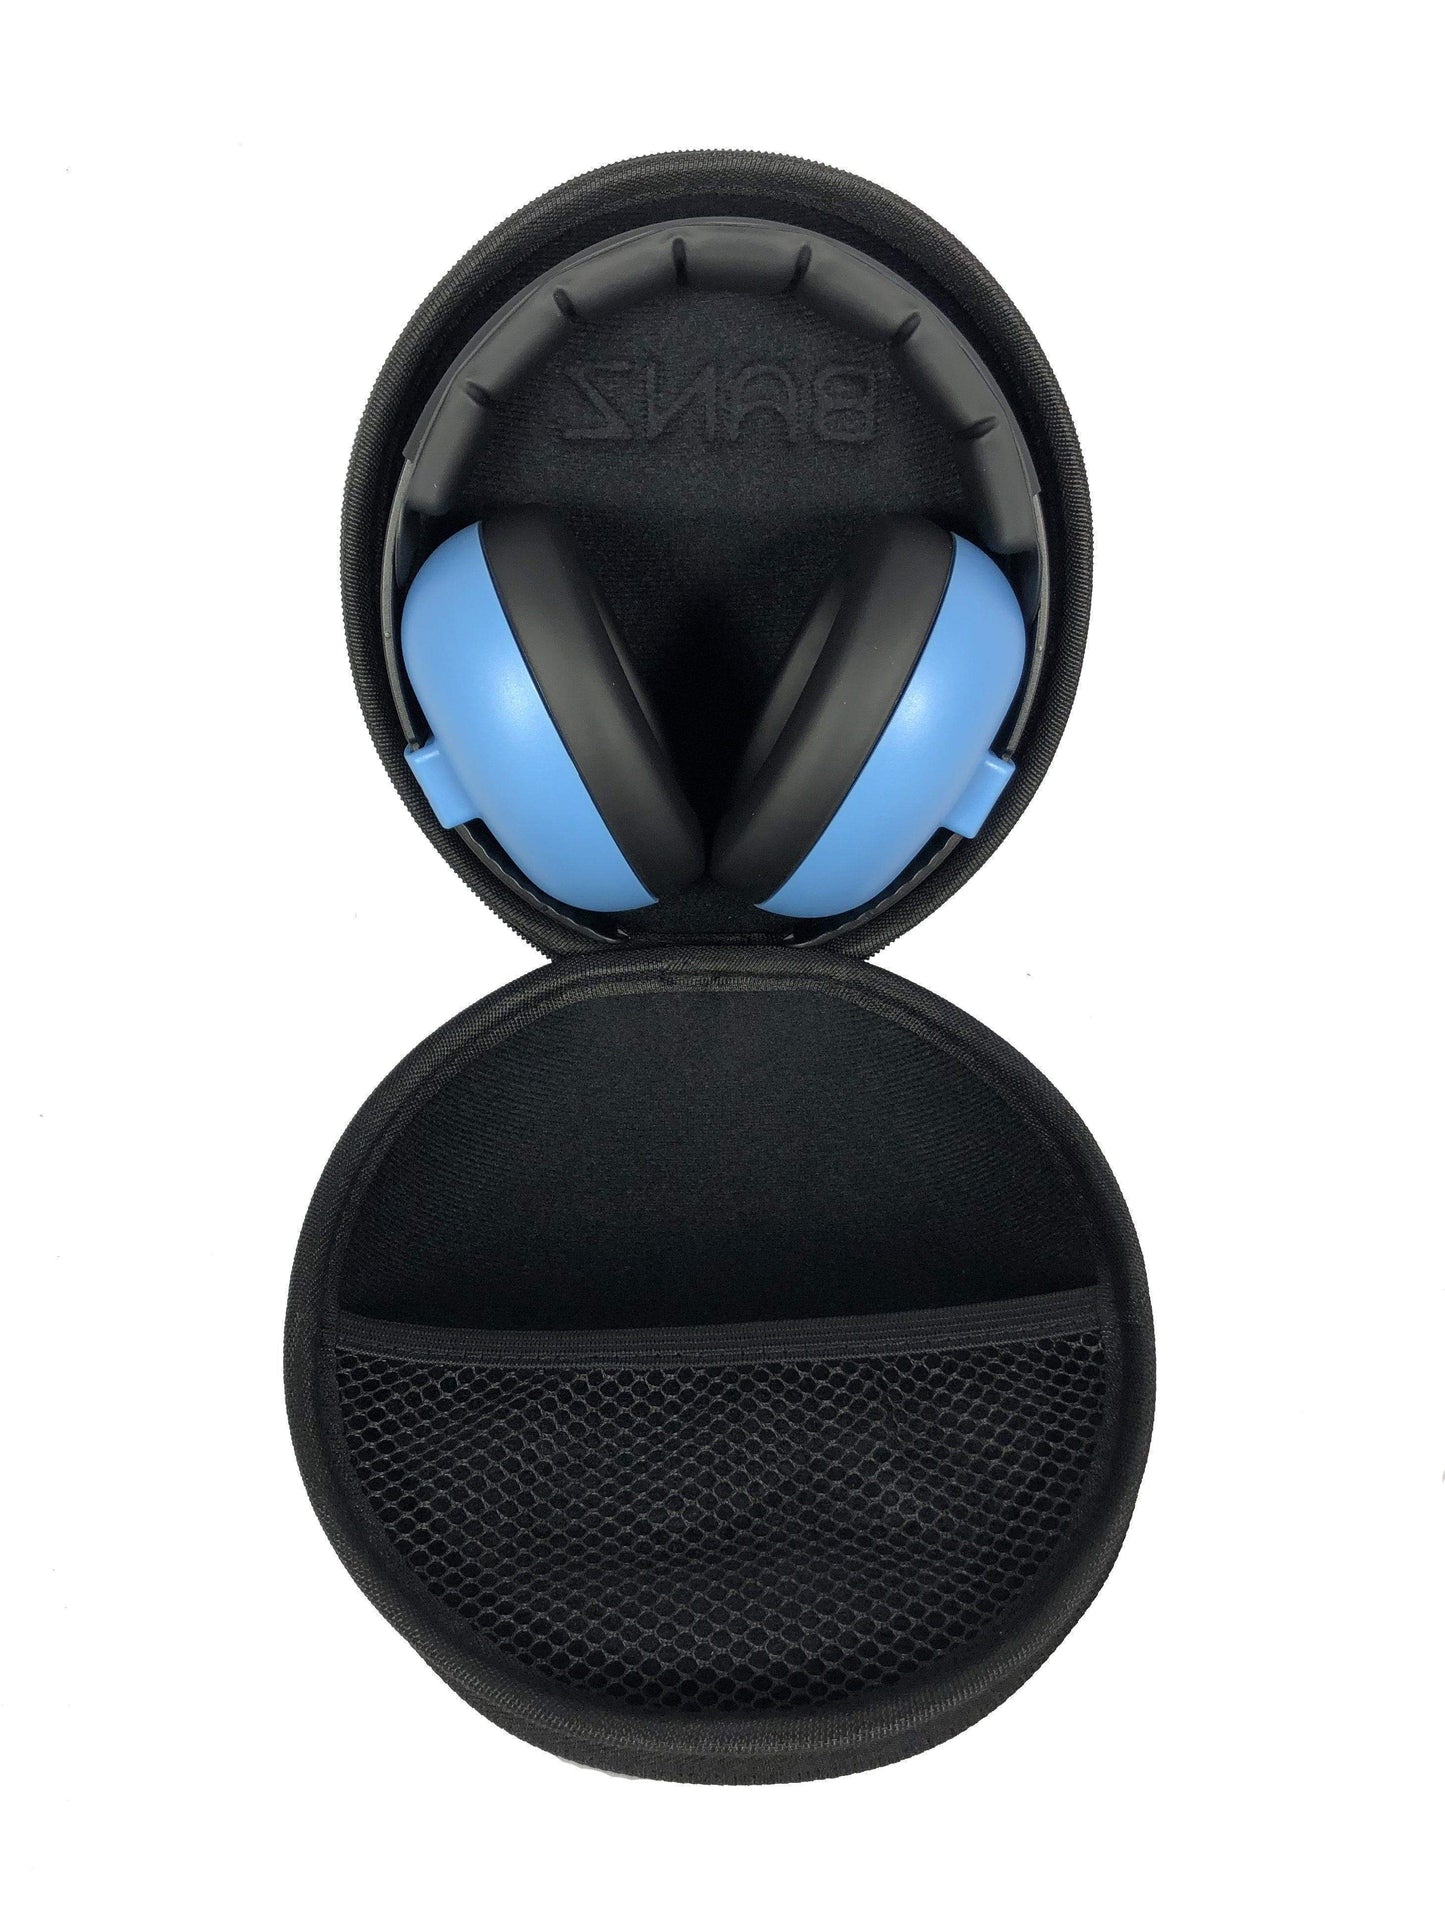 BANZ Baby Earmuff Zeecase shown open with baby earmuffs positioned inside to sow fit - earmuffs not included